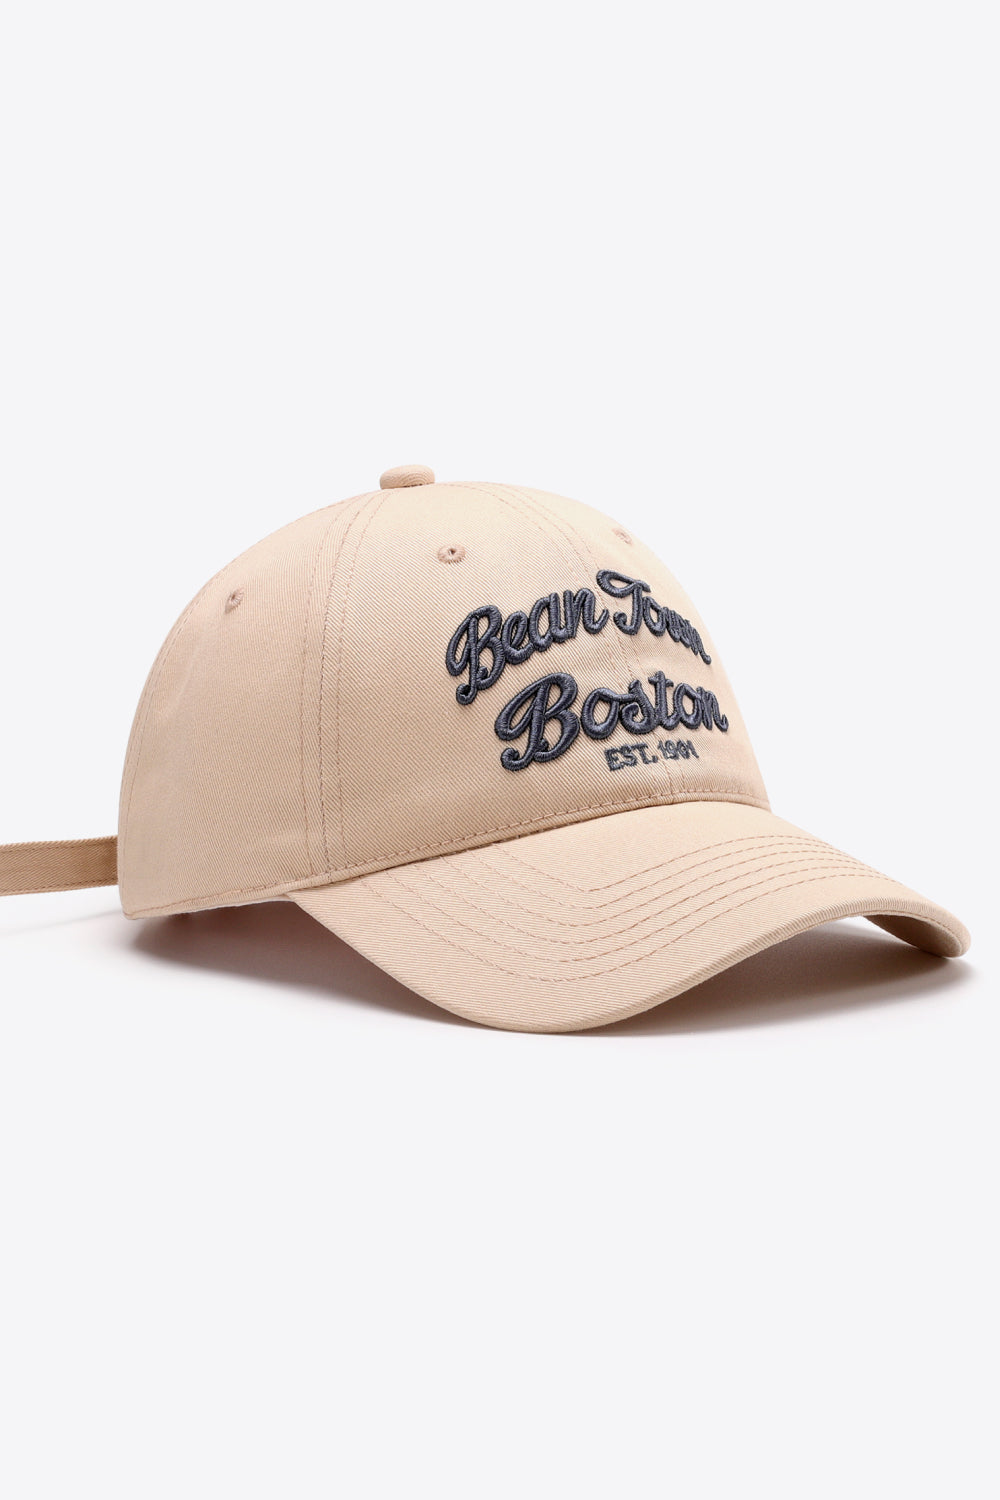 Embroidered Graphic Adjustable Baseball Cap Tan One Size